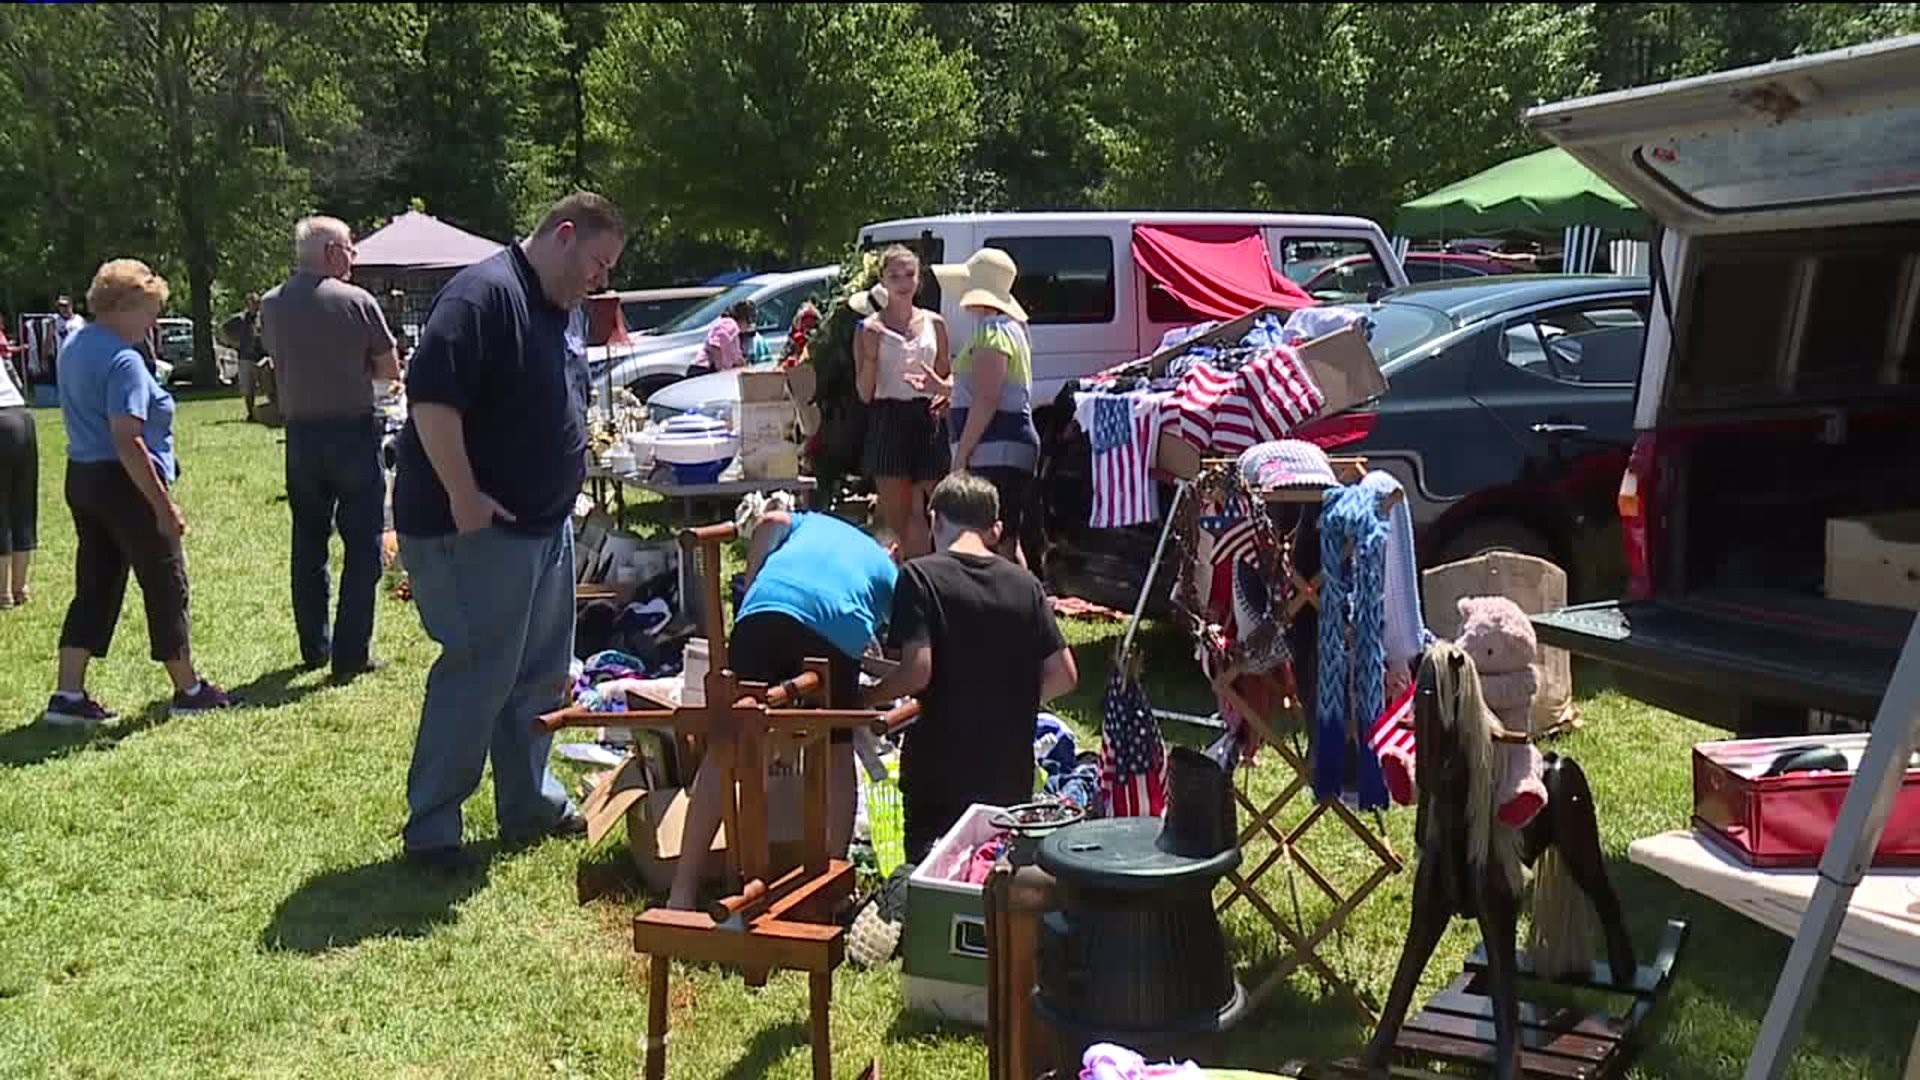 Shopping at Flea Market Supports Lions Club